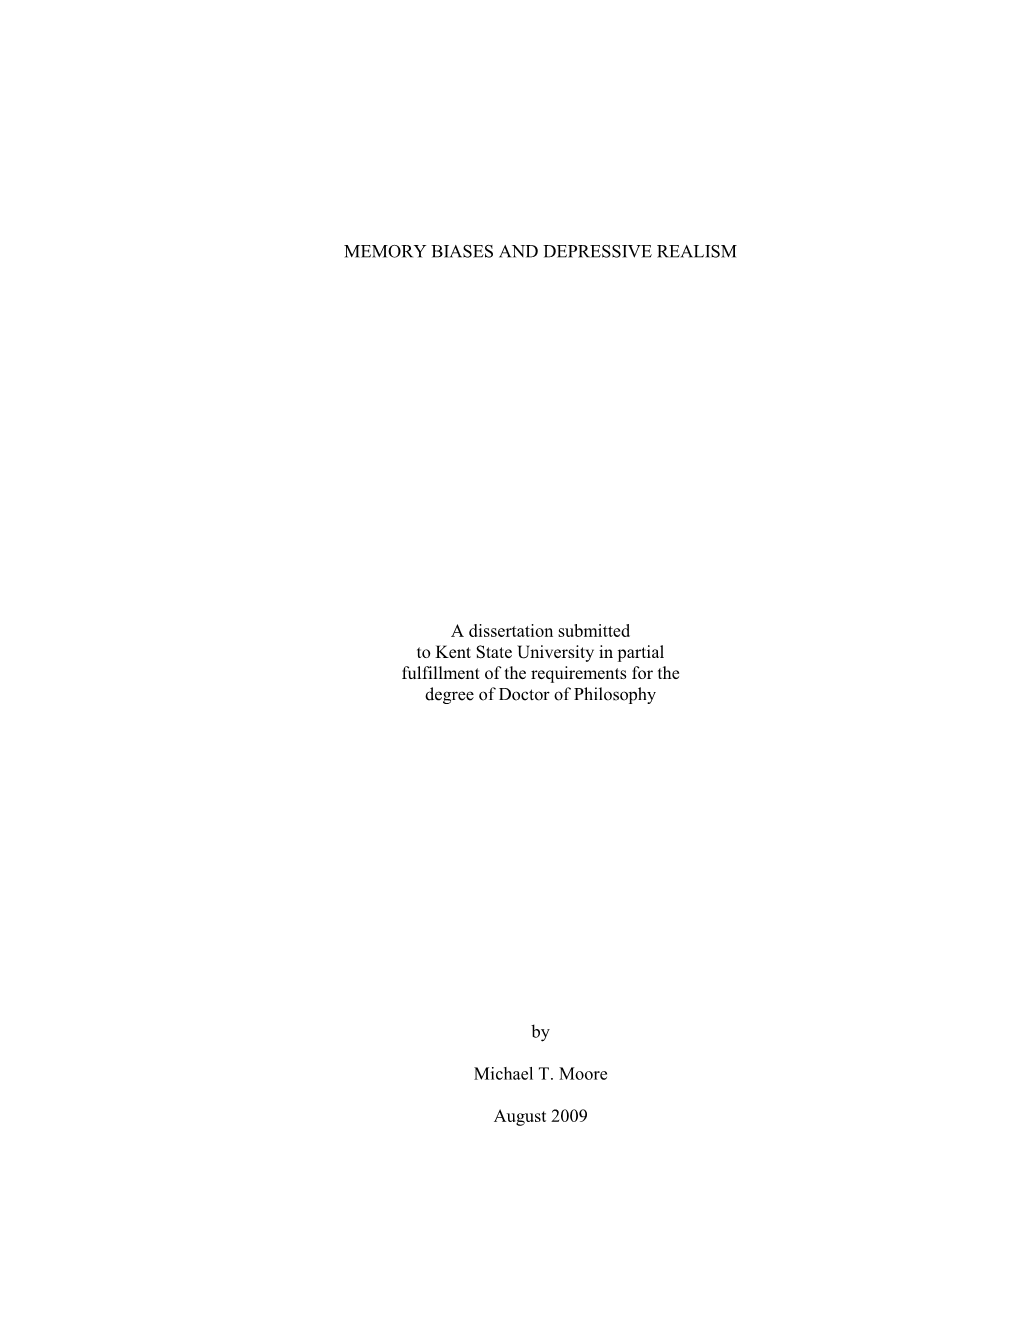 MEMORY BIASES and DEPRESSIVE REALISM a Dissertation Submitted